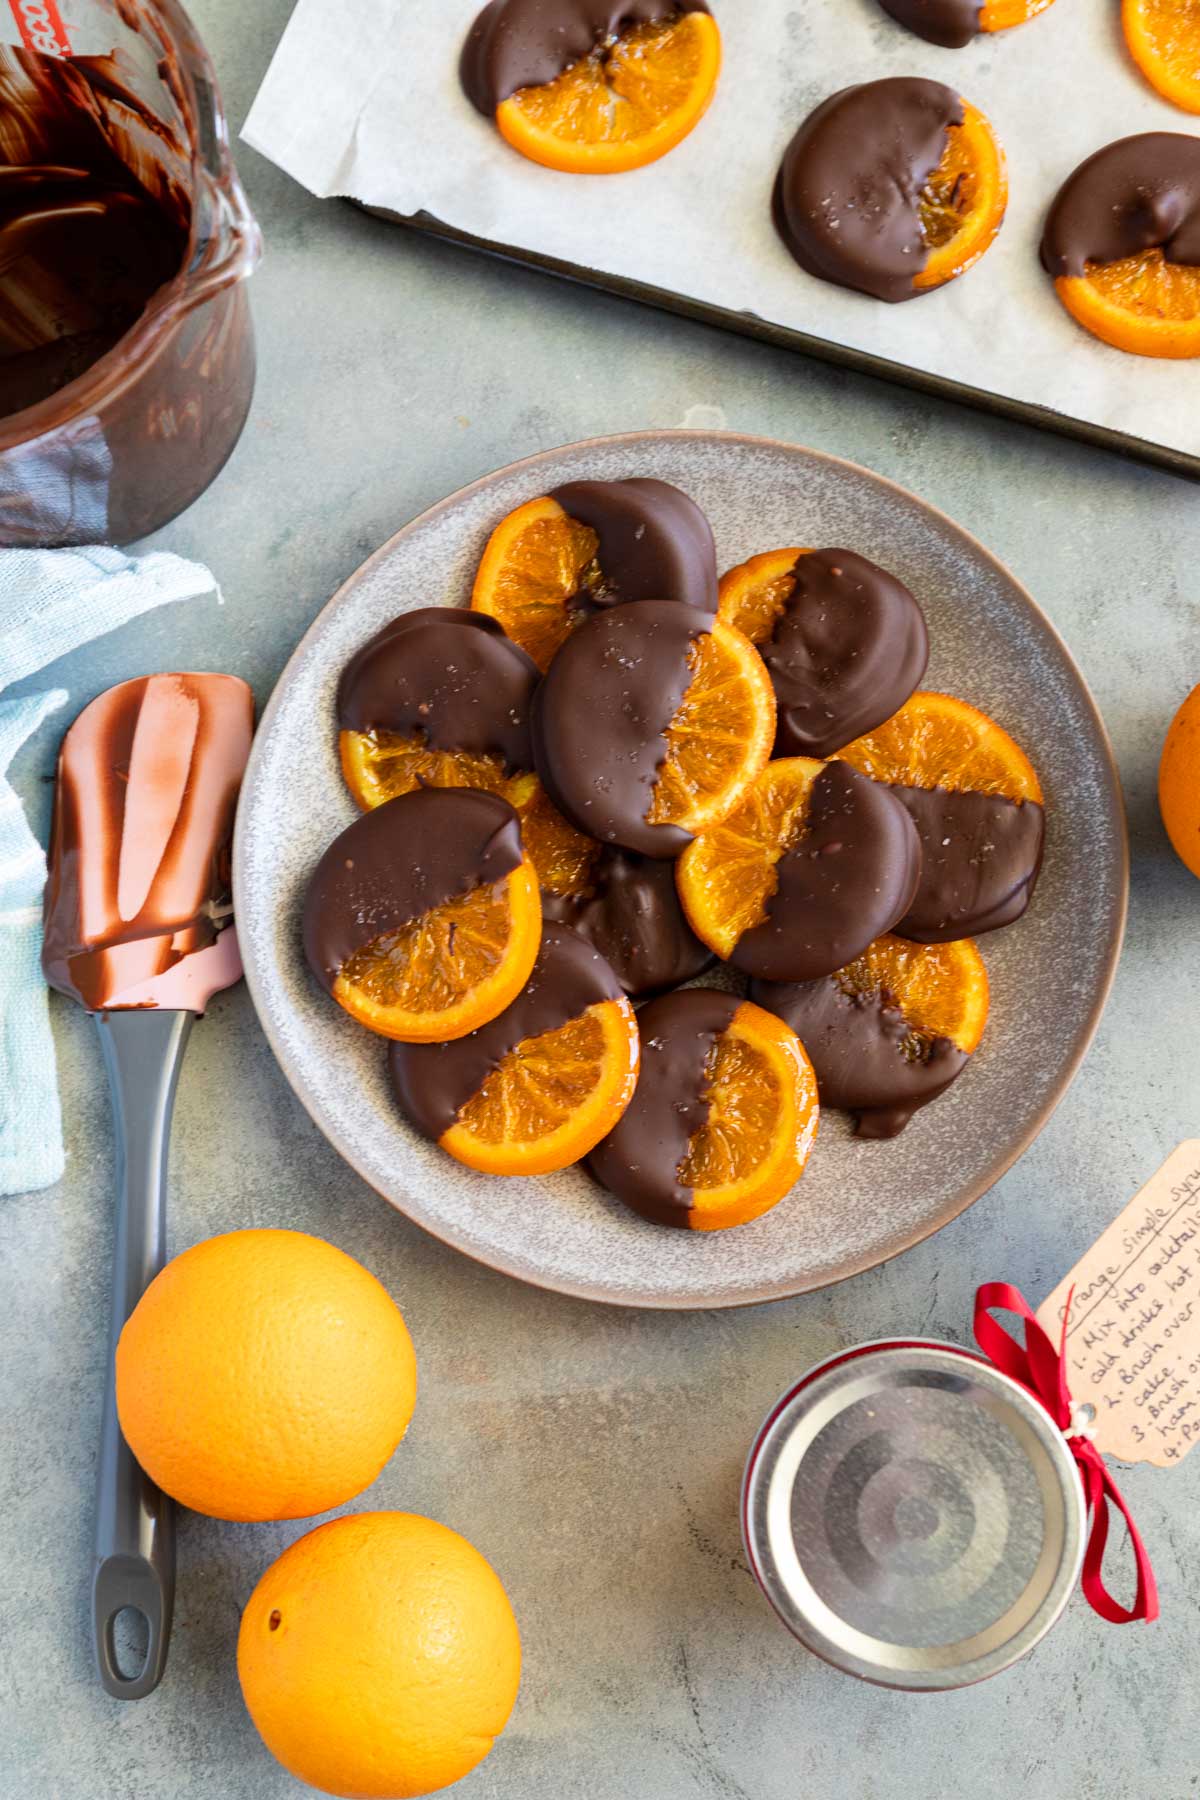 A mottled blue plater of candied orange slices dipped in chocolate with oranges and kitchen equipment around them.